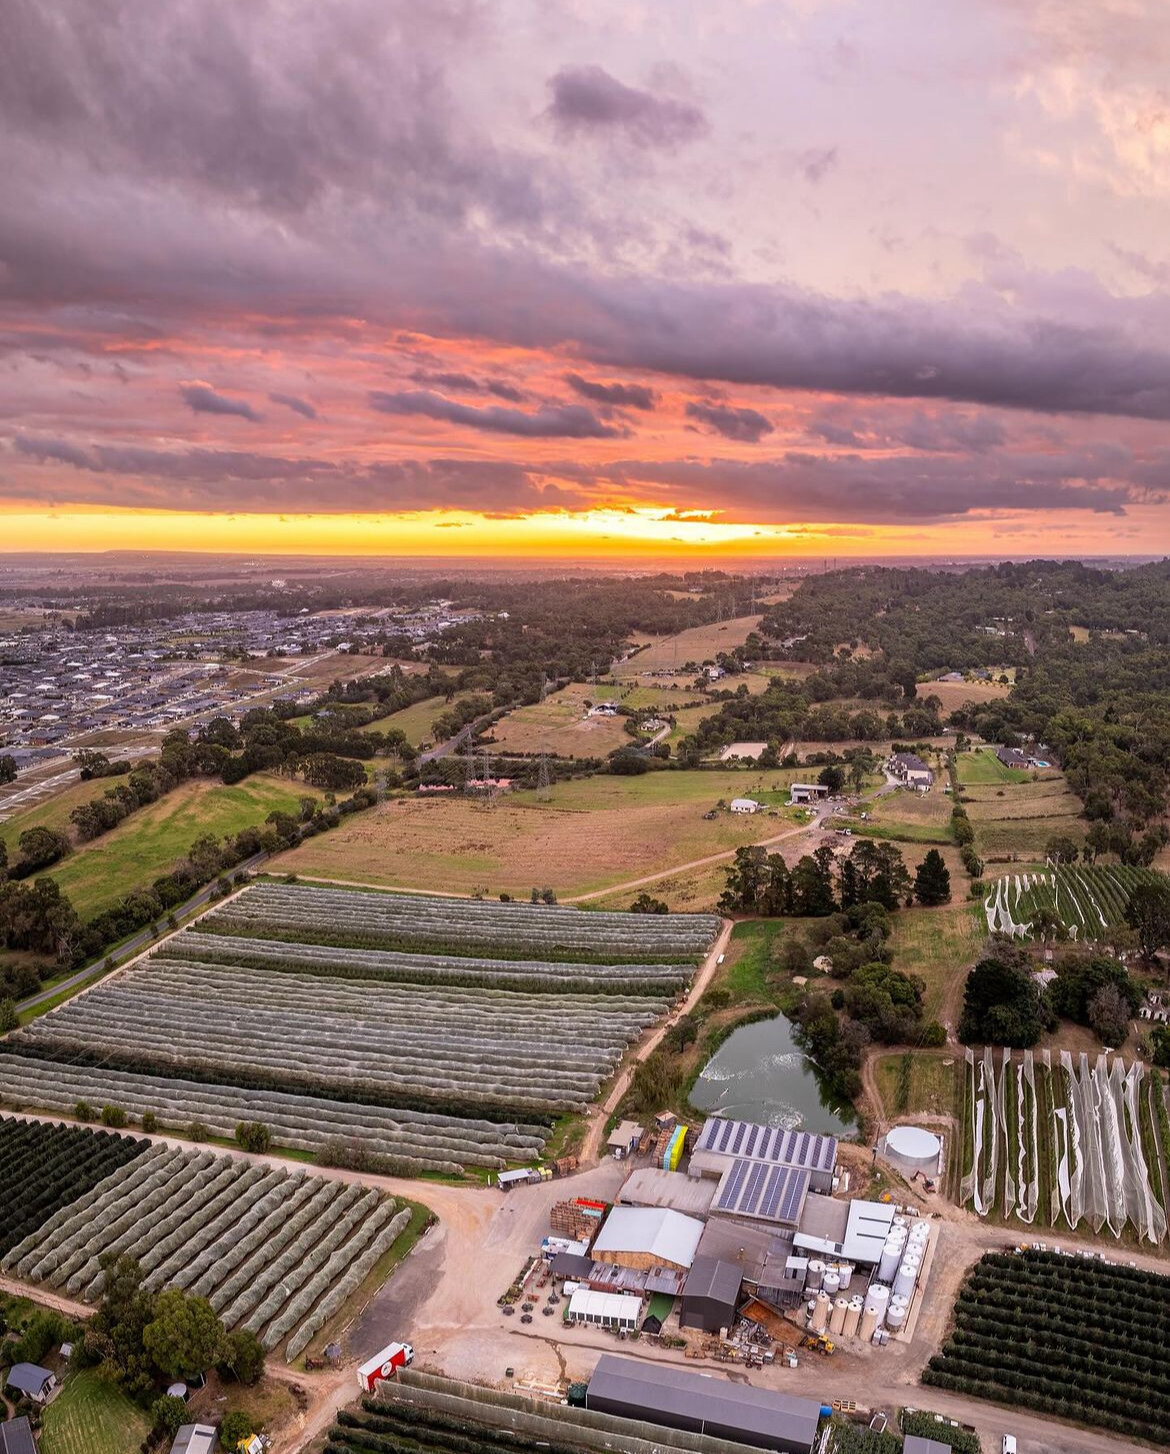 Our beautiful orchard from above 🍎
Its always great to see the orchard from a different perspective, especially during picking season, you get to see the rows we start picking earlier than others 
Thank you Daniel for capturing this awesome photo !
